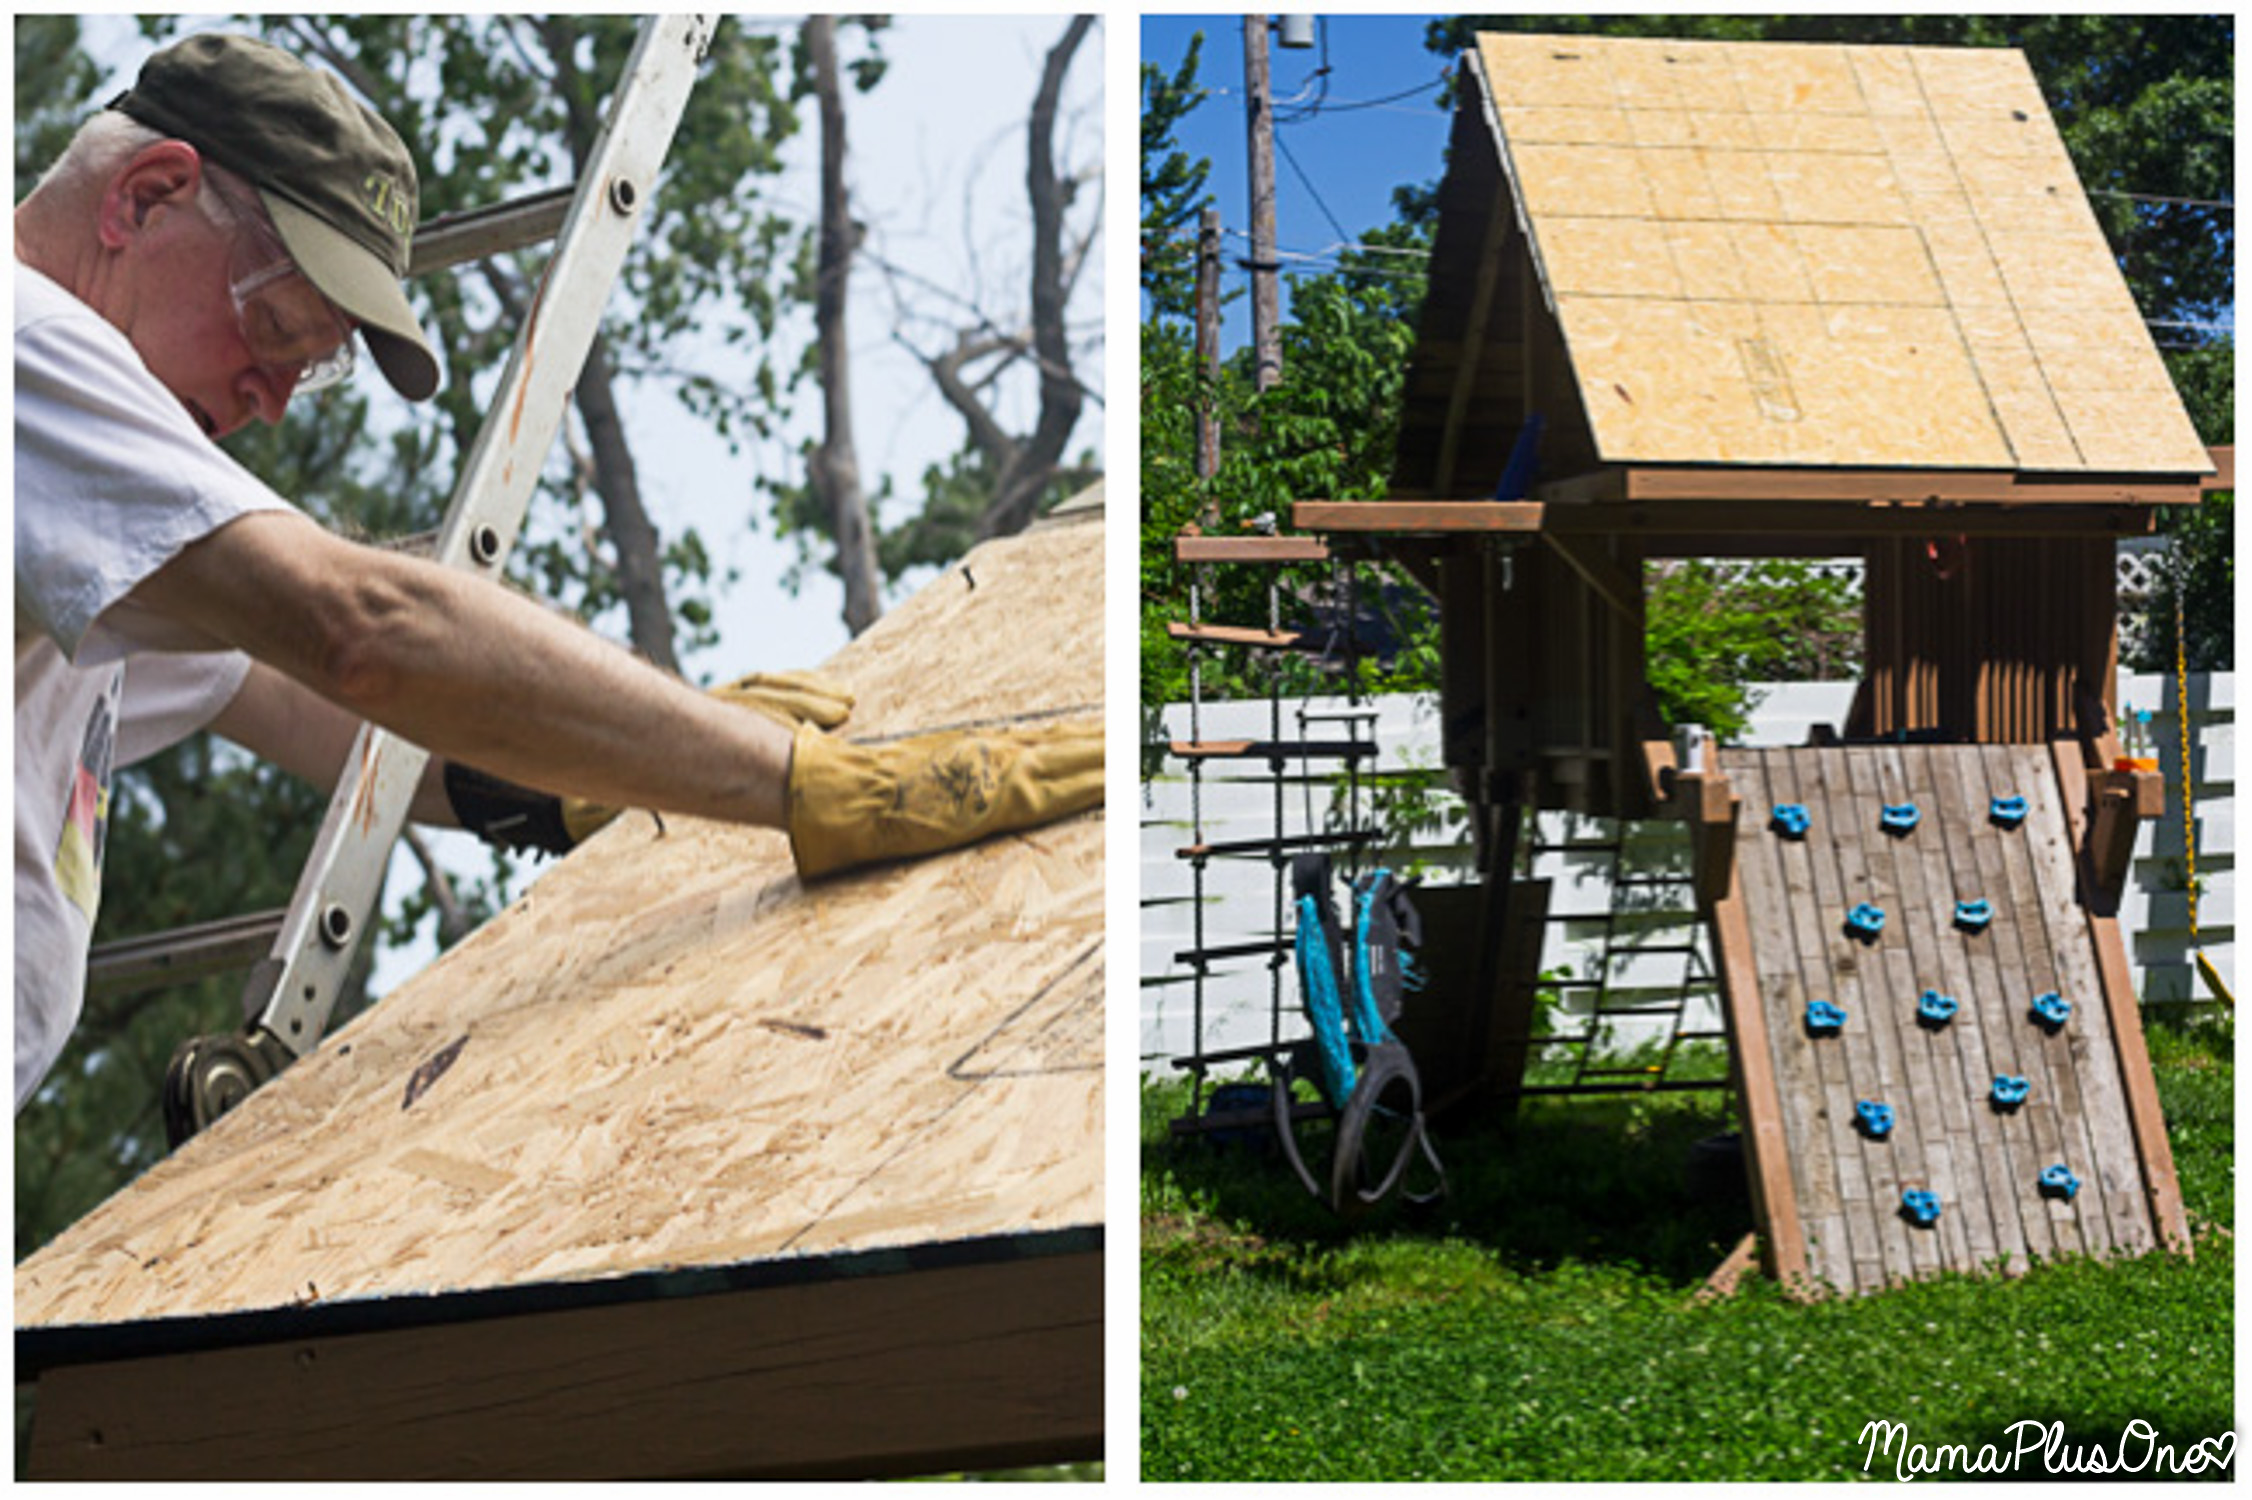 When you invest in a playset, you want it to last-- that's not an investment to take lightly. With the right care, you can make your backyard play set last decades, through your kids AND grandchildren! Here's how to help make your playset last with some TLC and GAF Shingles. #RoofedItMyself [ad]